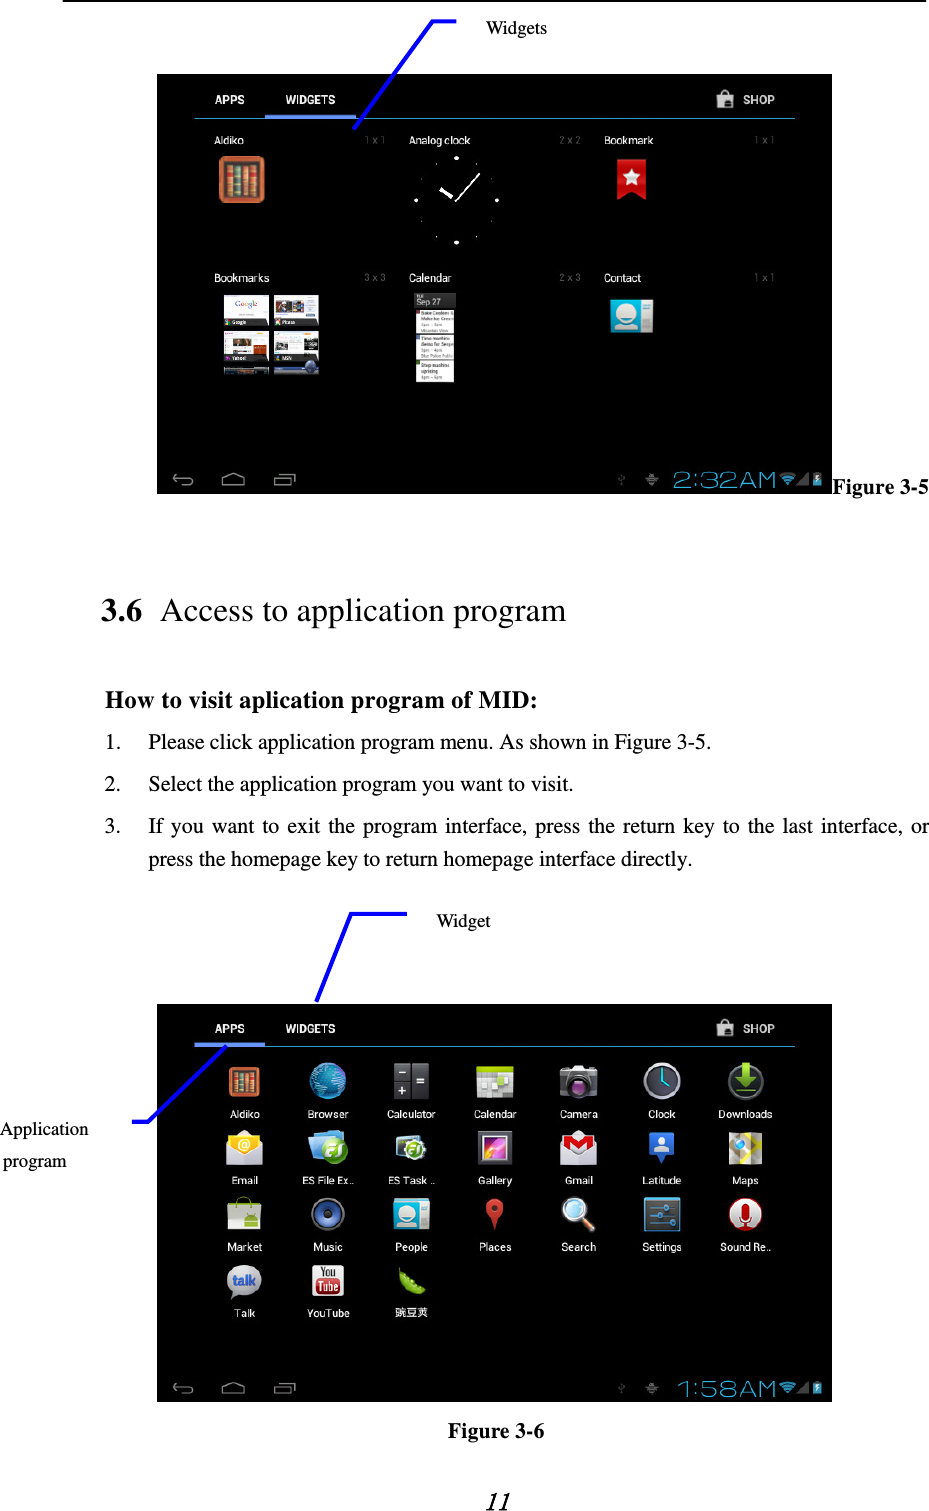   11  Figure 3-5 3.6 Access to application program How to visit aplication program of MID: 1. Please click application program menu. As shown in Figure 3-5. 2. Select the application program you want to visit. 3. If you want to exit the program interface, press the return key to the last interface, or press the homepage key to return homepage interface directly.     Figure 3-6 Application program Widget Widgets 